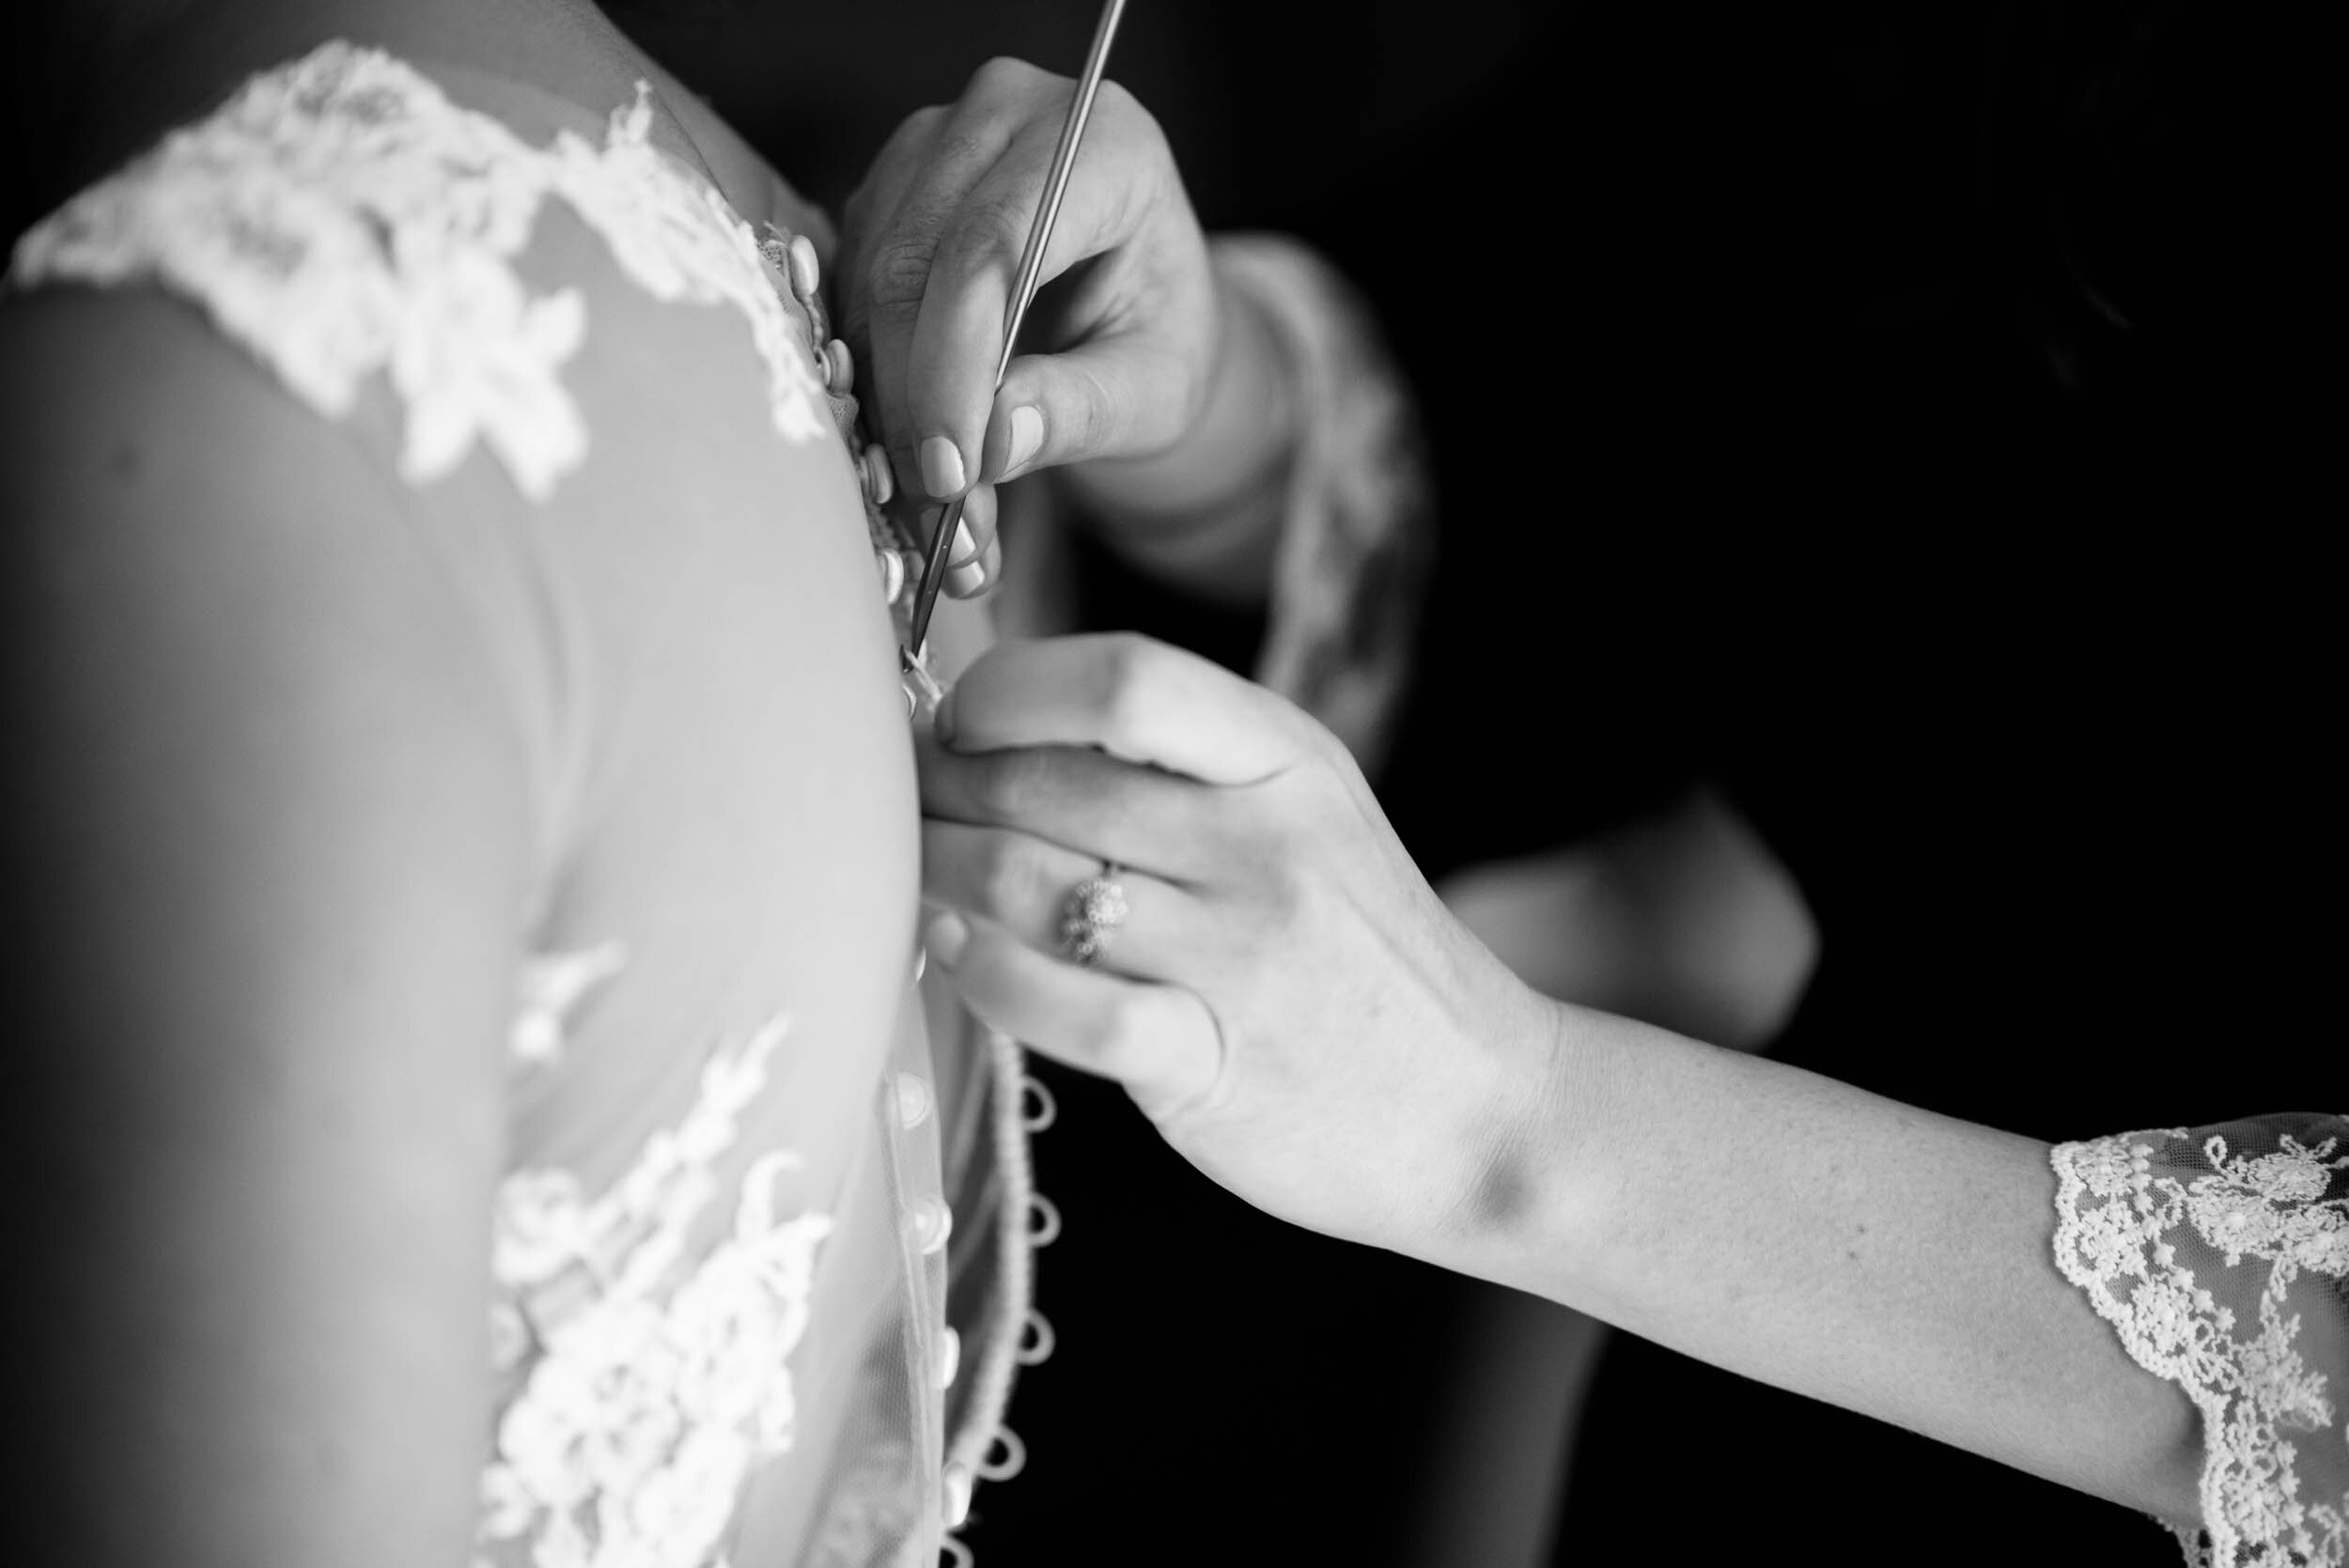 Getting ready photo of the bride: Ravenswood Event Center Chicago wedding captured by J. Brown Photography.  